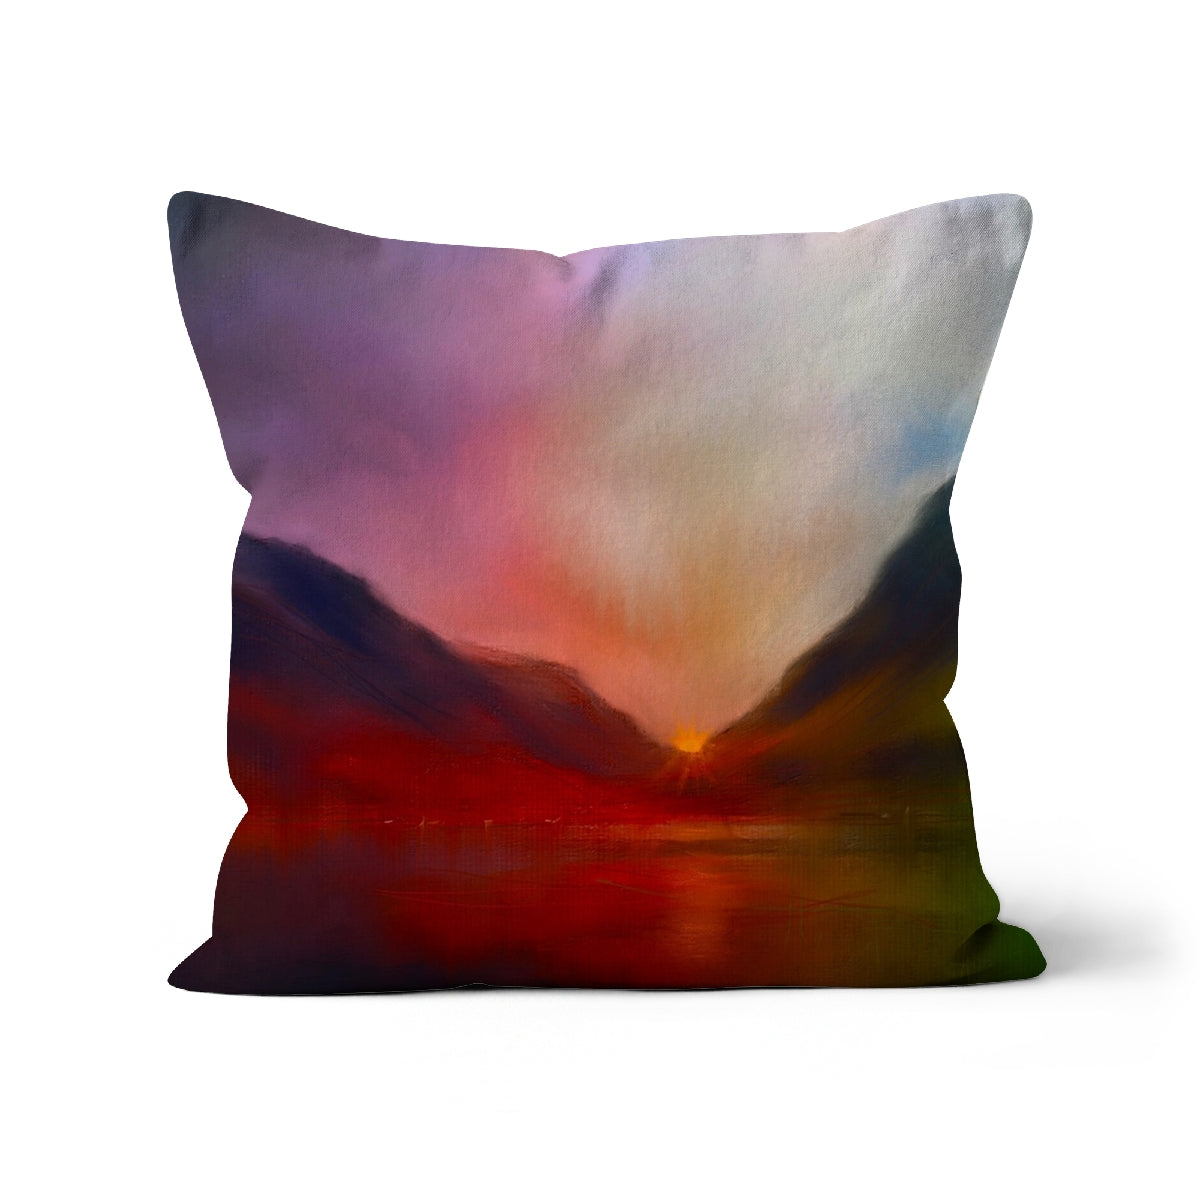 Glencoe Sunset Art Gifts Cushion-Cushions-Glencoe Art Gallery-Faux Suede-24"x24"-Paintings, Prints, Homeware, Art Gifts From Scotland By Scottish Artist Kevin Hunter